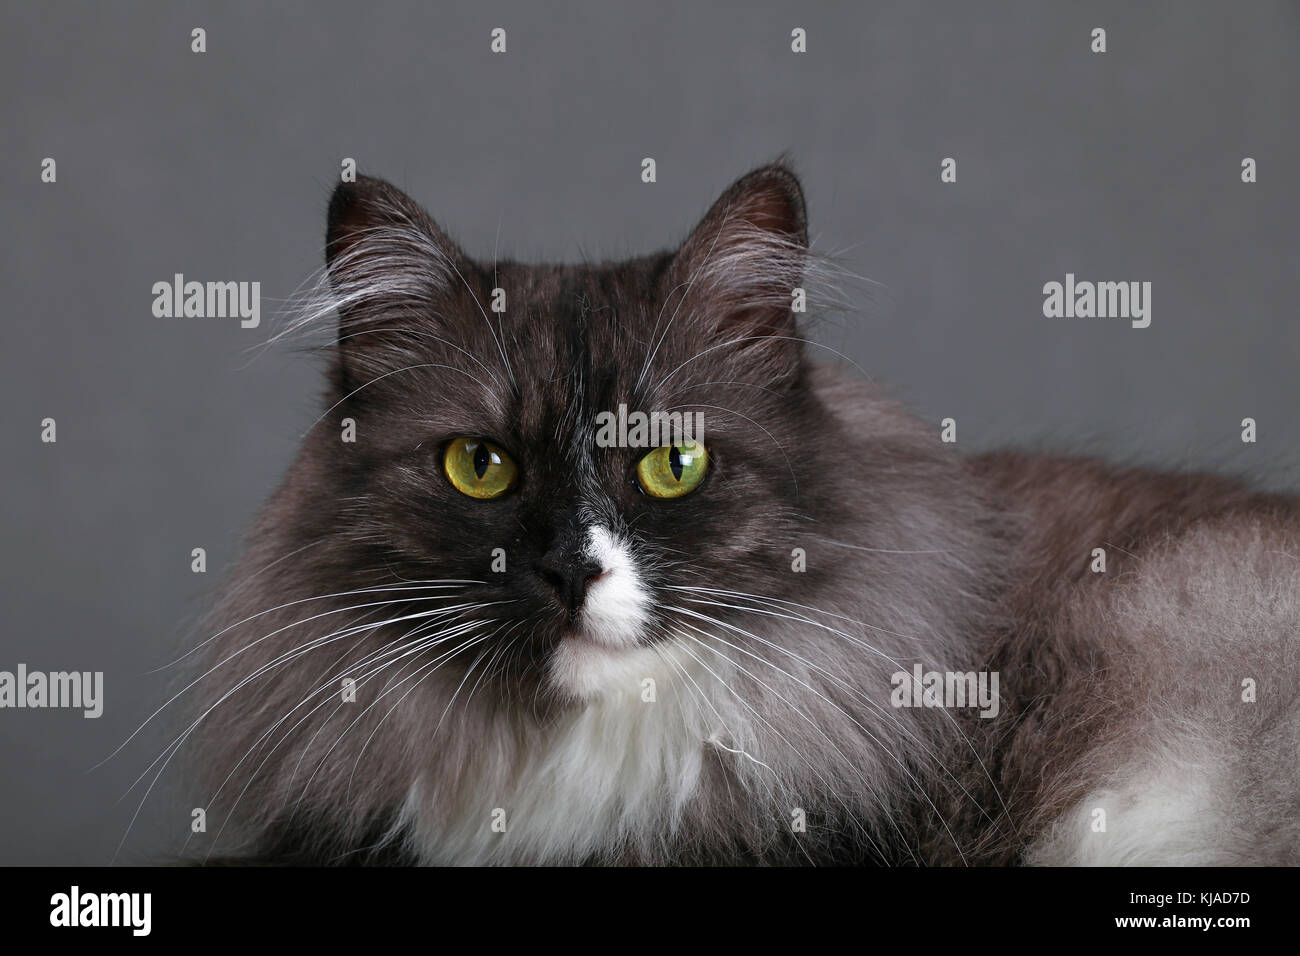 Close up portrait of one cute gray domestic cat with white spots and large whisker looking at camera over gray background, close up, low angle view Stock Photo